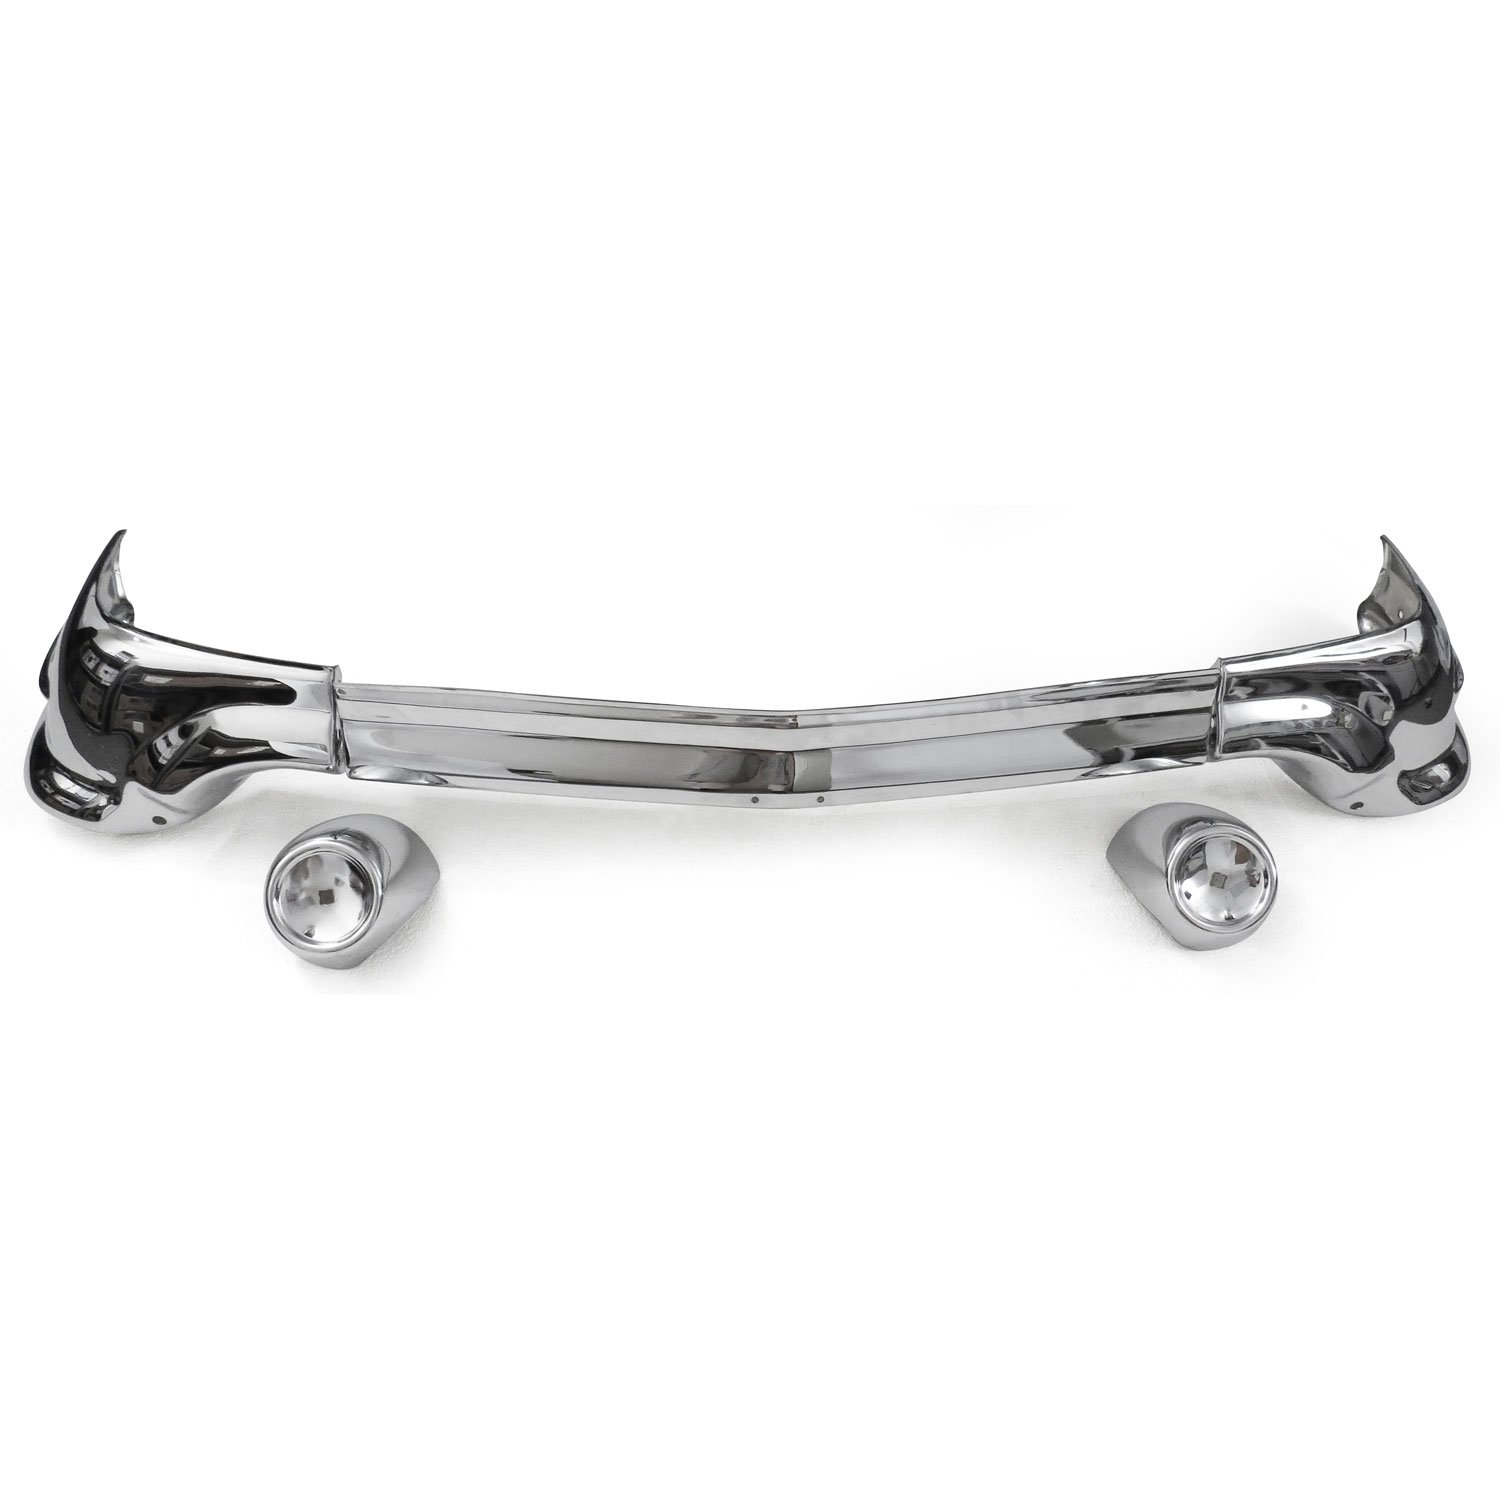 5-Piece Front Bumper Set for 1957 Chevy Bel-Air